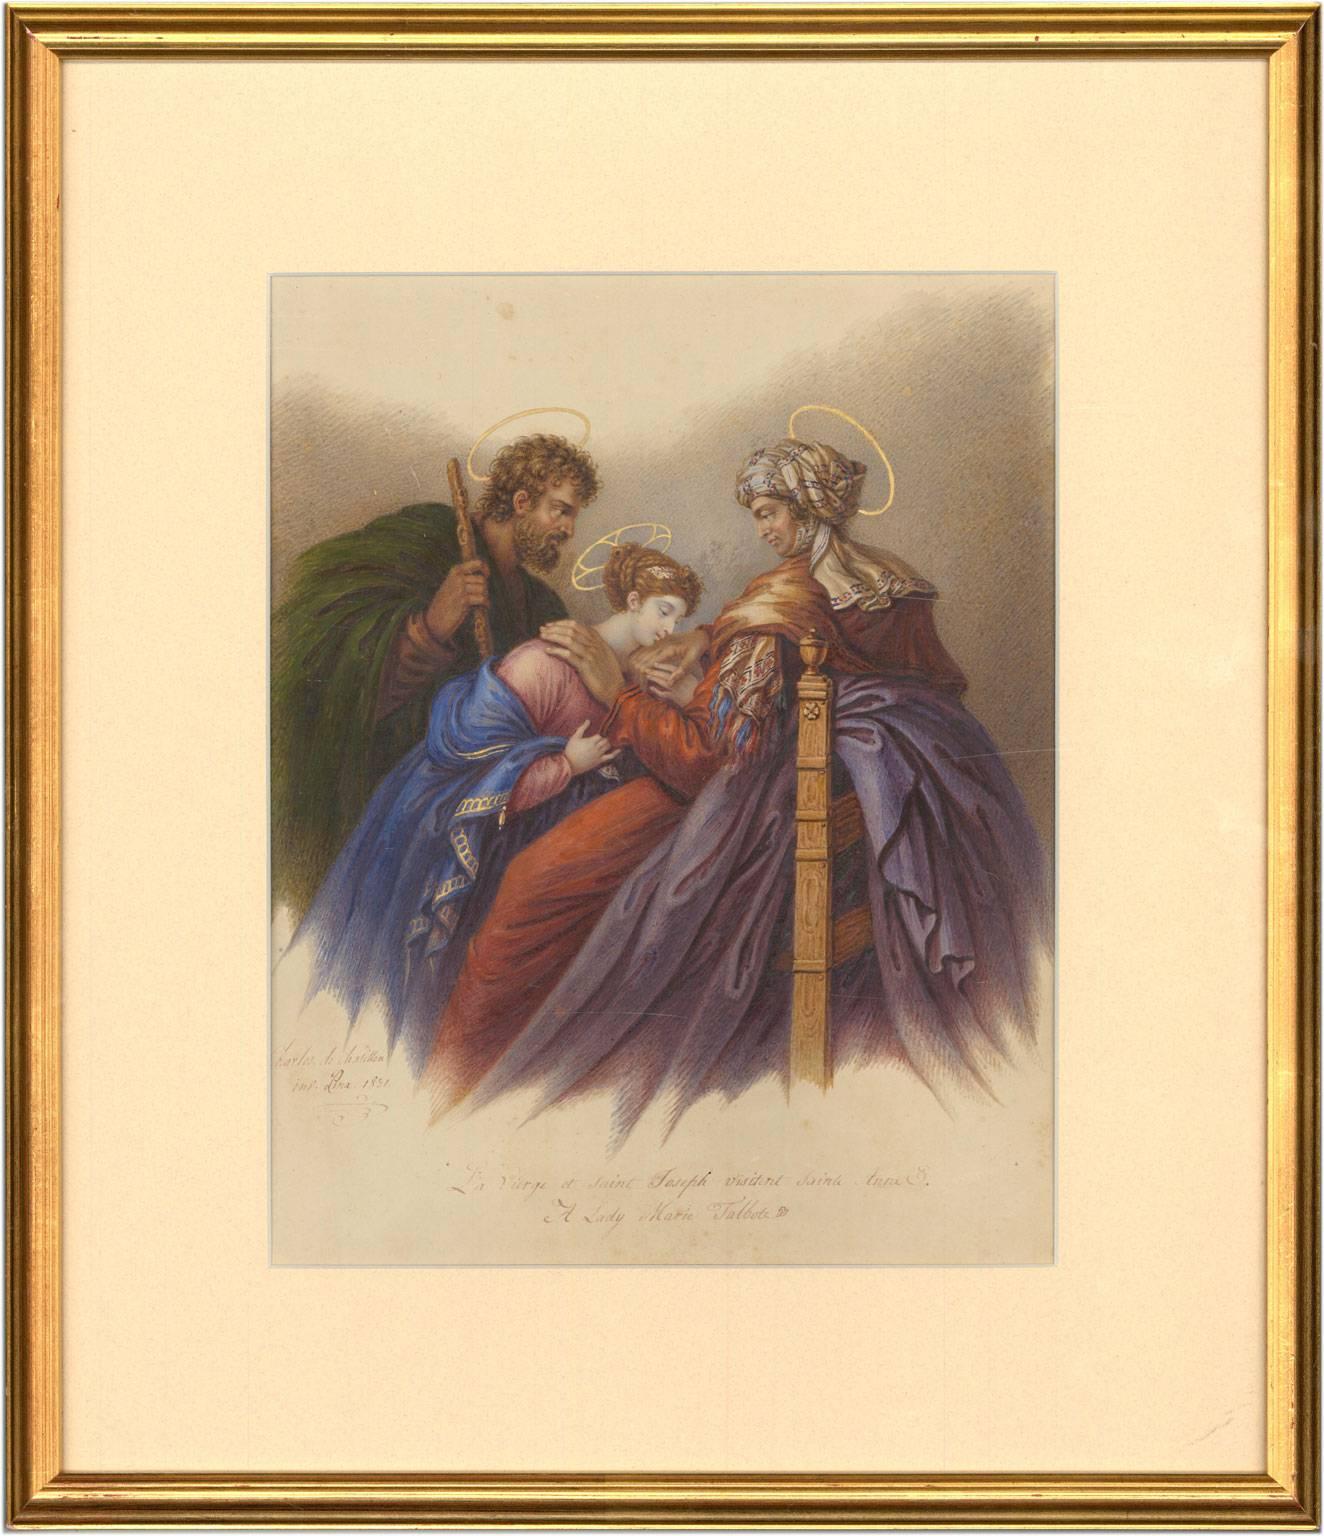 A finely executed 19th century French watercolour of The Virgin and St. Joseph visiting St. Anne. By the Frnech painter Charles de Chatillon (1777-1844), signed and dated 1831 to the lower left. Inscribed to lower margin "La Vierge et Saint Joseph